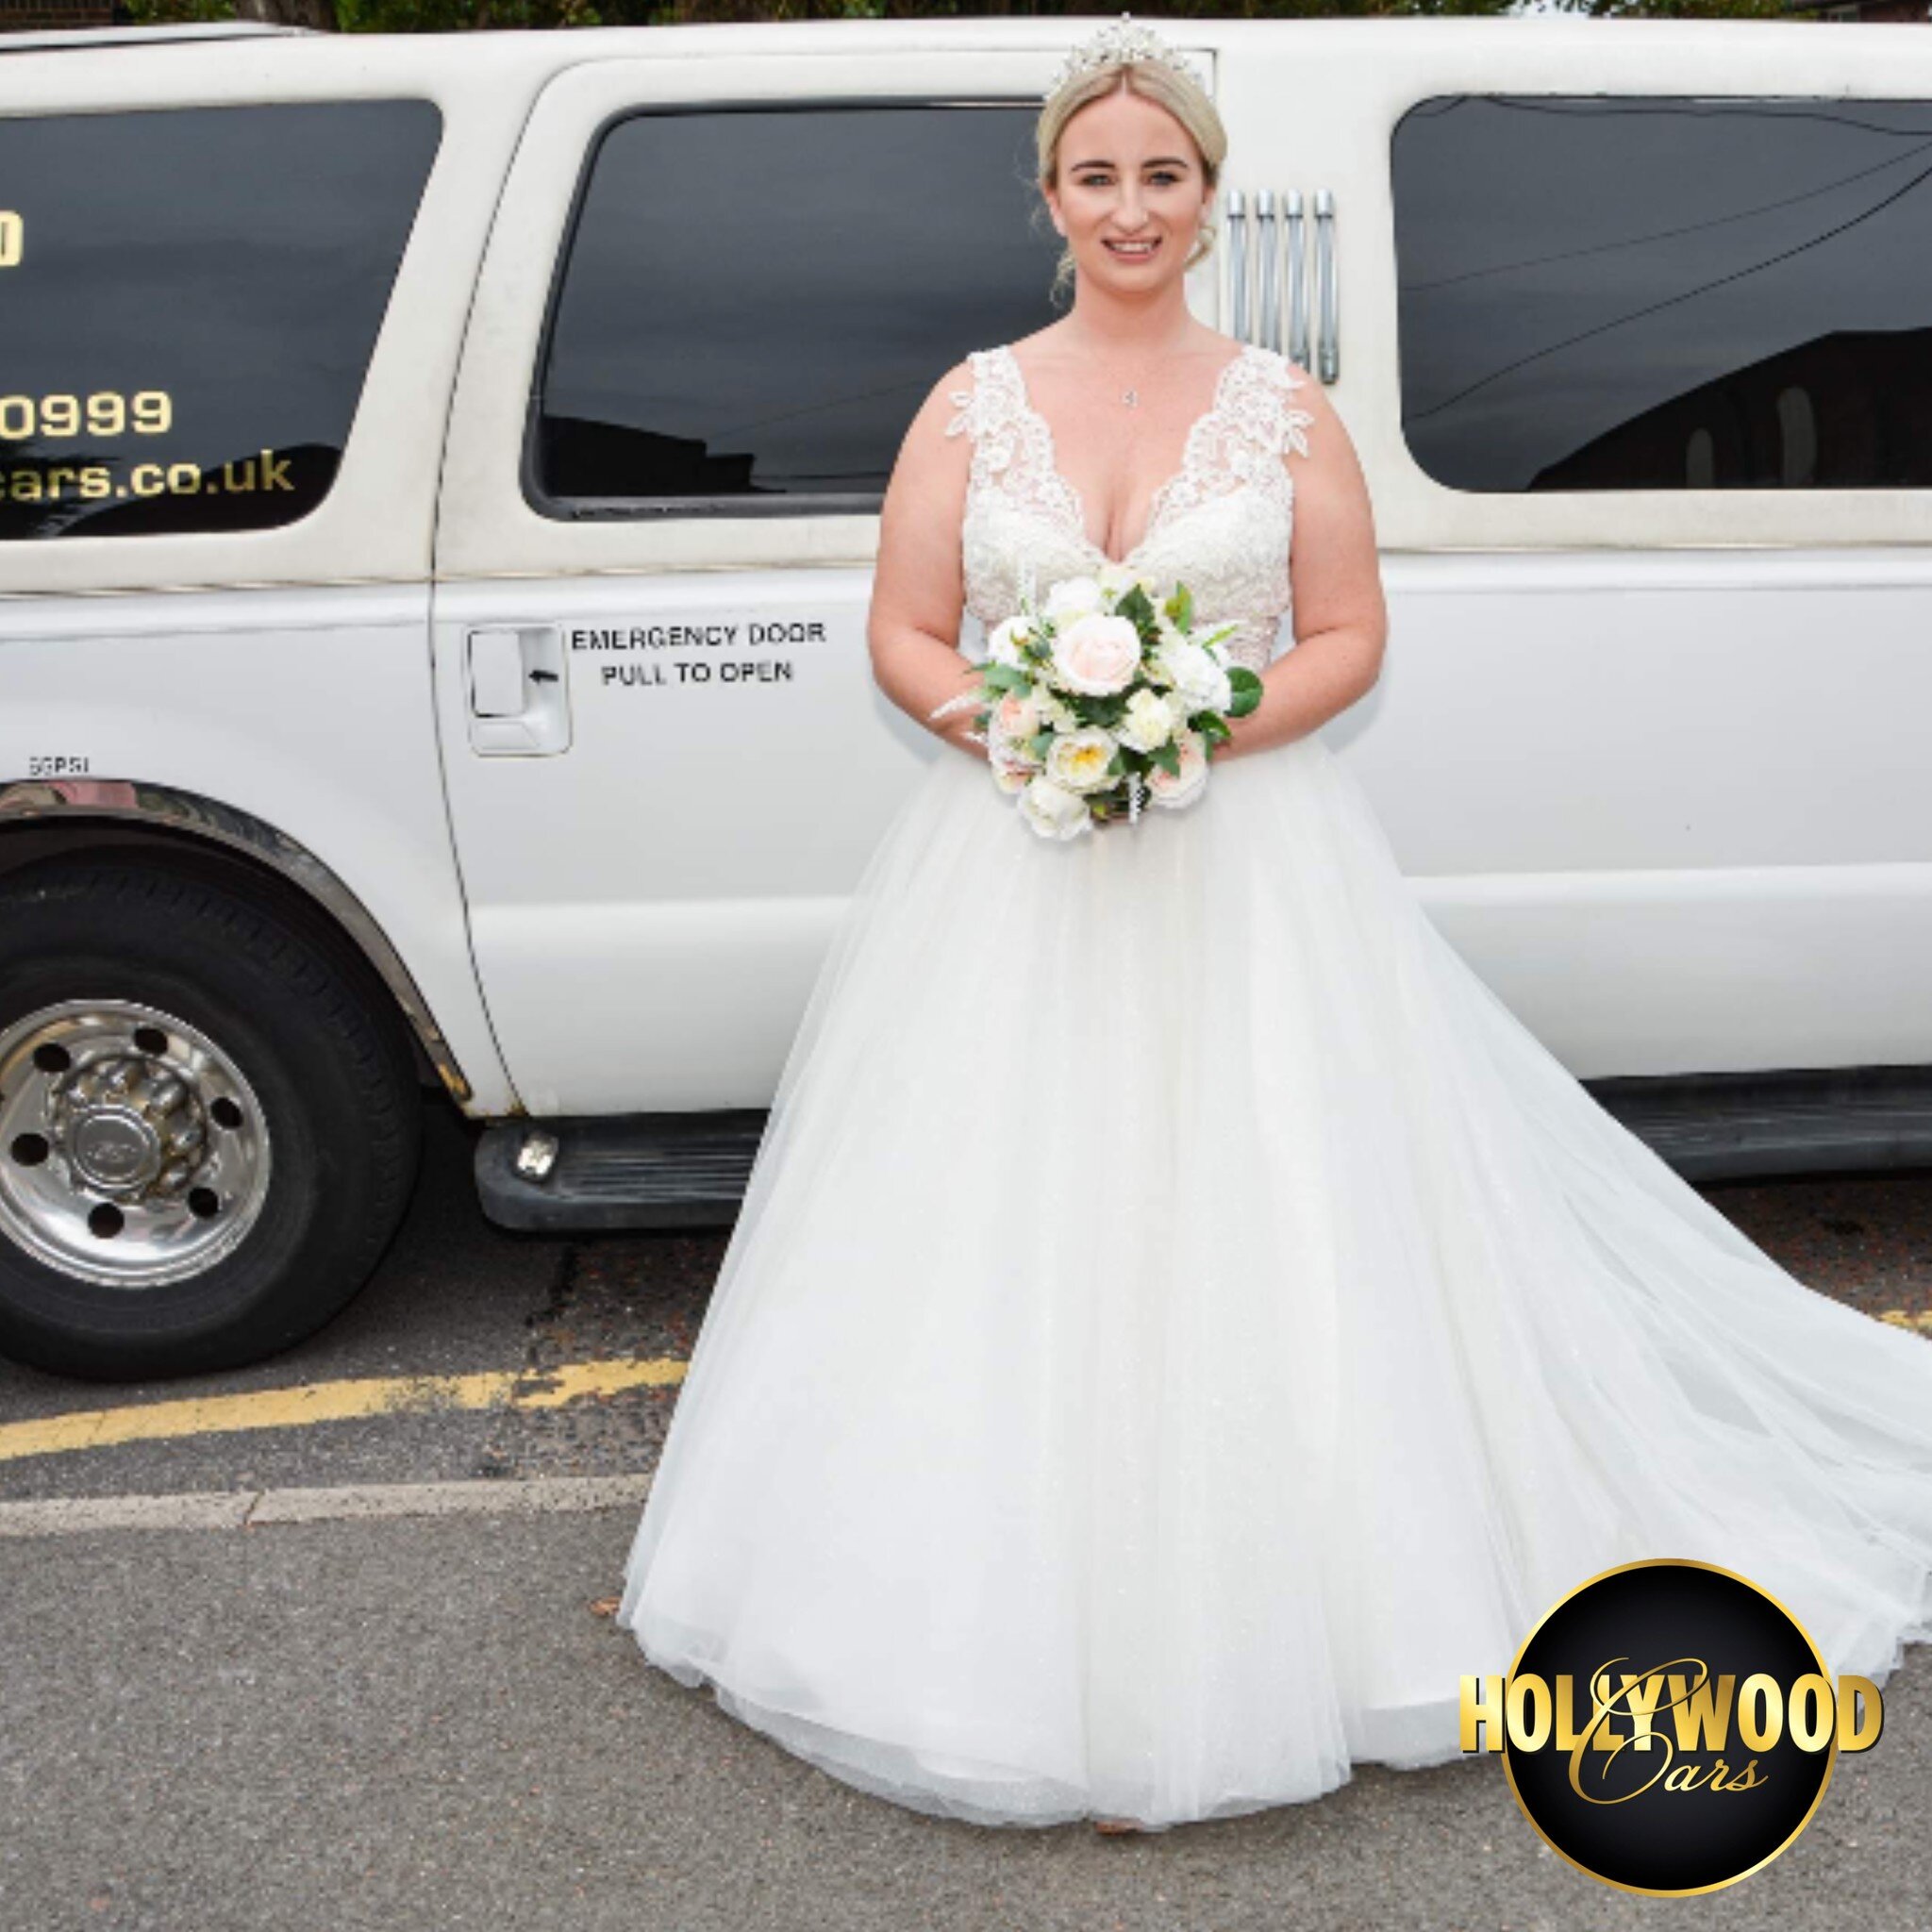 The bride travelling in style on her big day! ✨✨✨
Send us an enquiry now at www.hollywoodcars.co.uk

#party #partybus #limo #limohire #LuxuryTravel
#liverpool #drinks #partytime #music #love #dj
#wedding #nightlife #photography #instagram #drinks
#ha